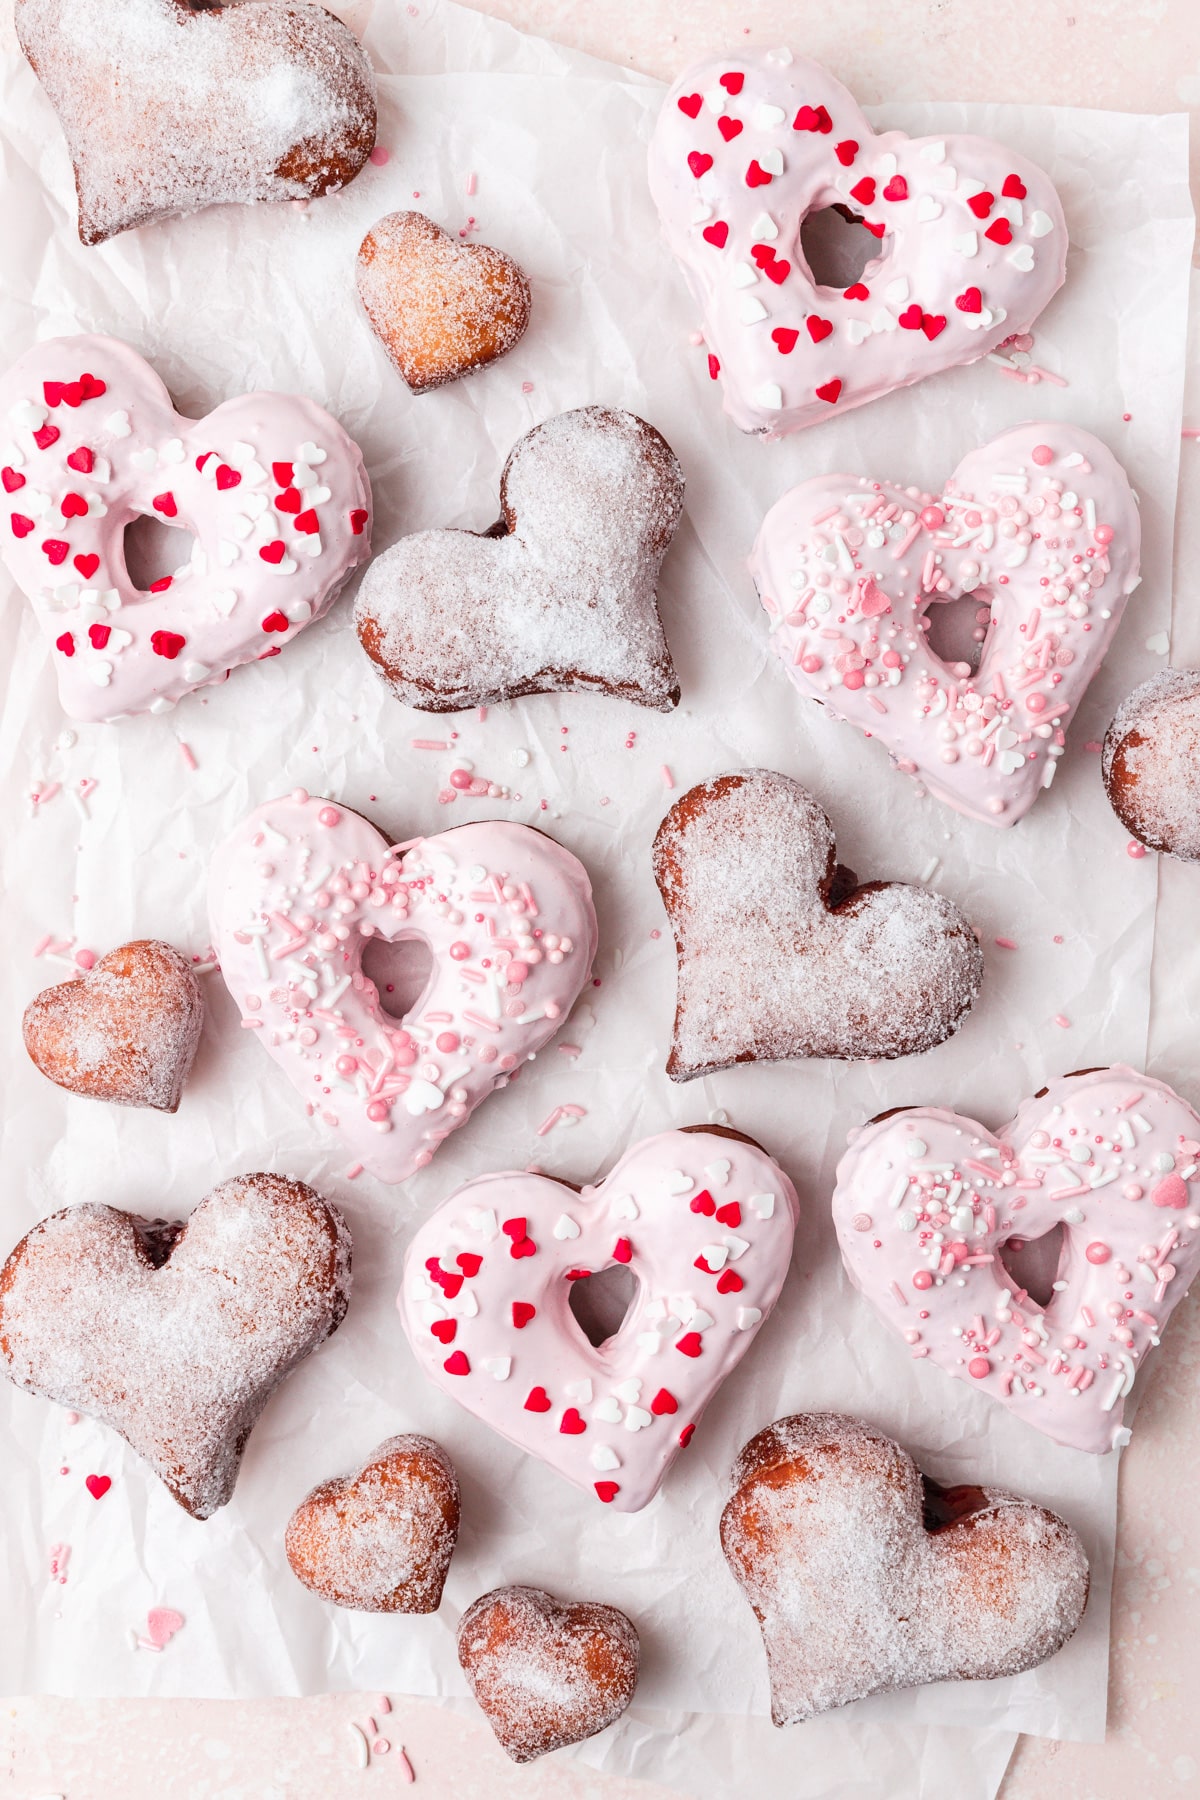 heart shaped donuts, some with pink glaze and some filled with jelly.